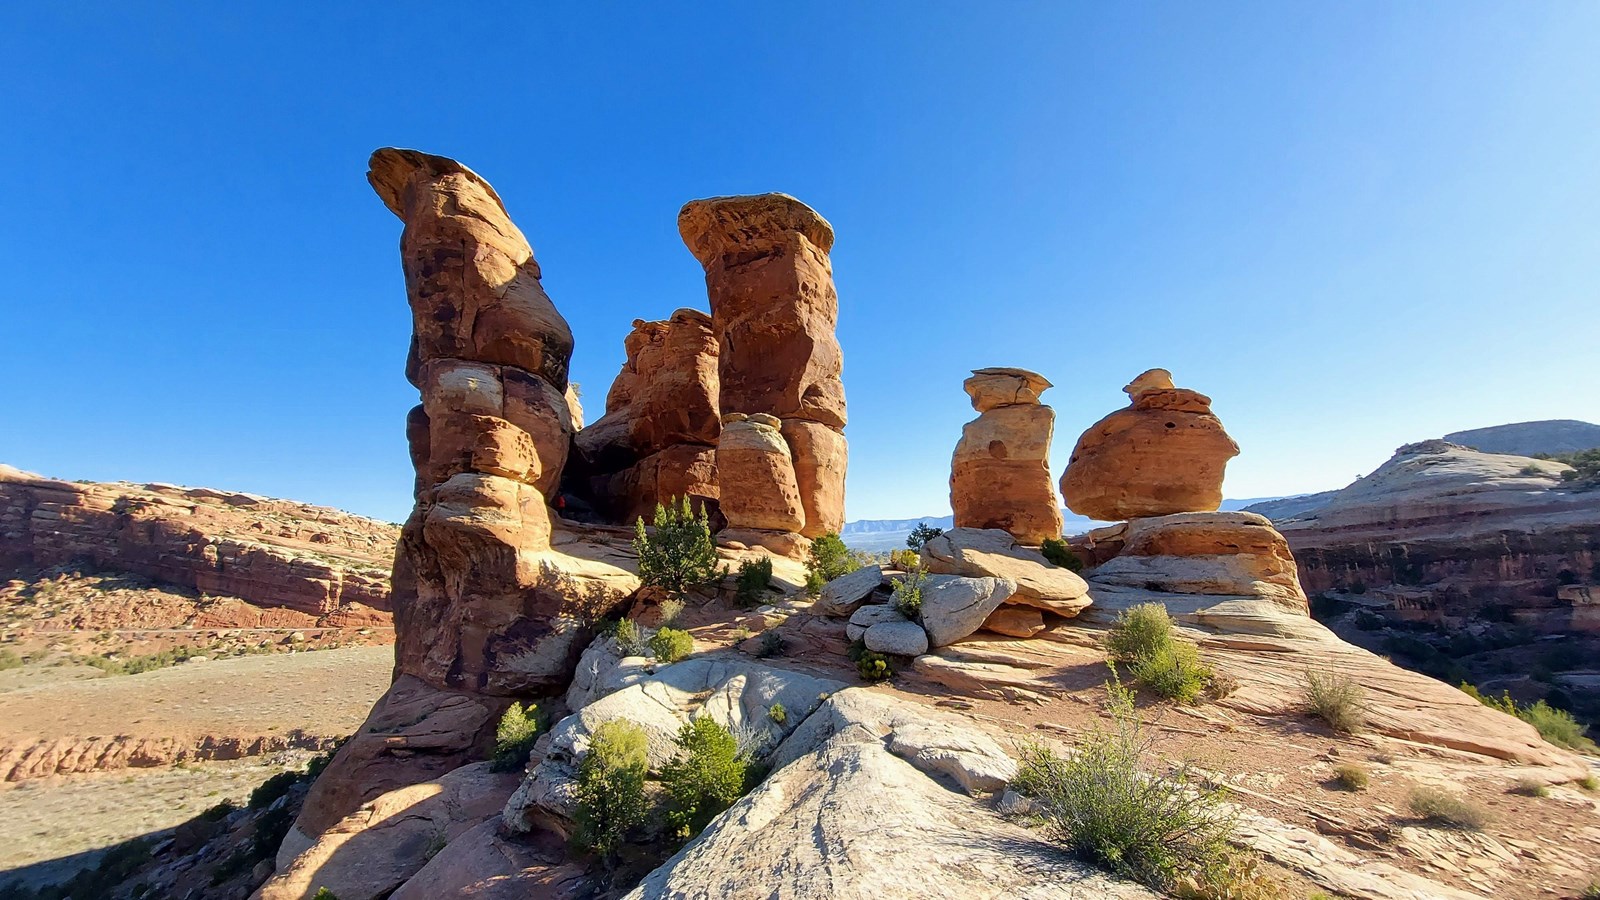 red-orange sandstone towers and boulders with an open blue sky